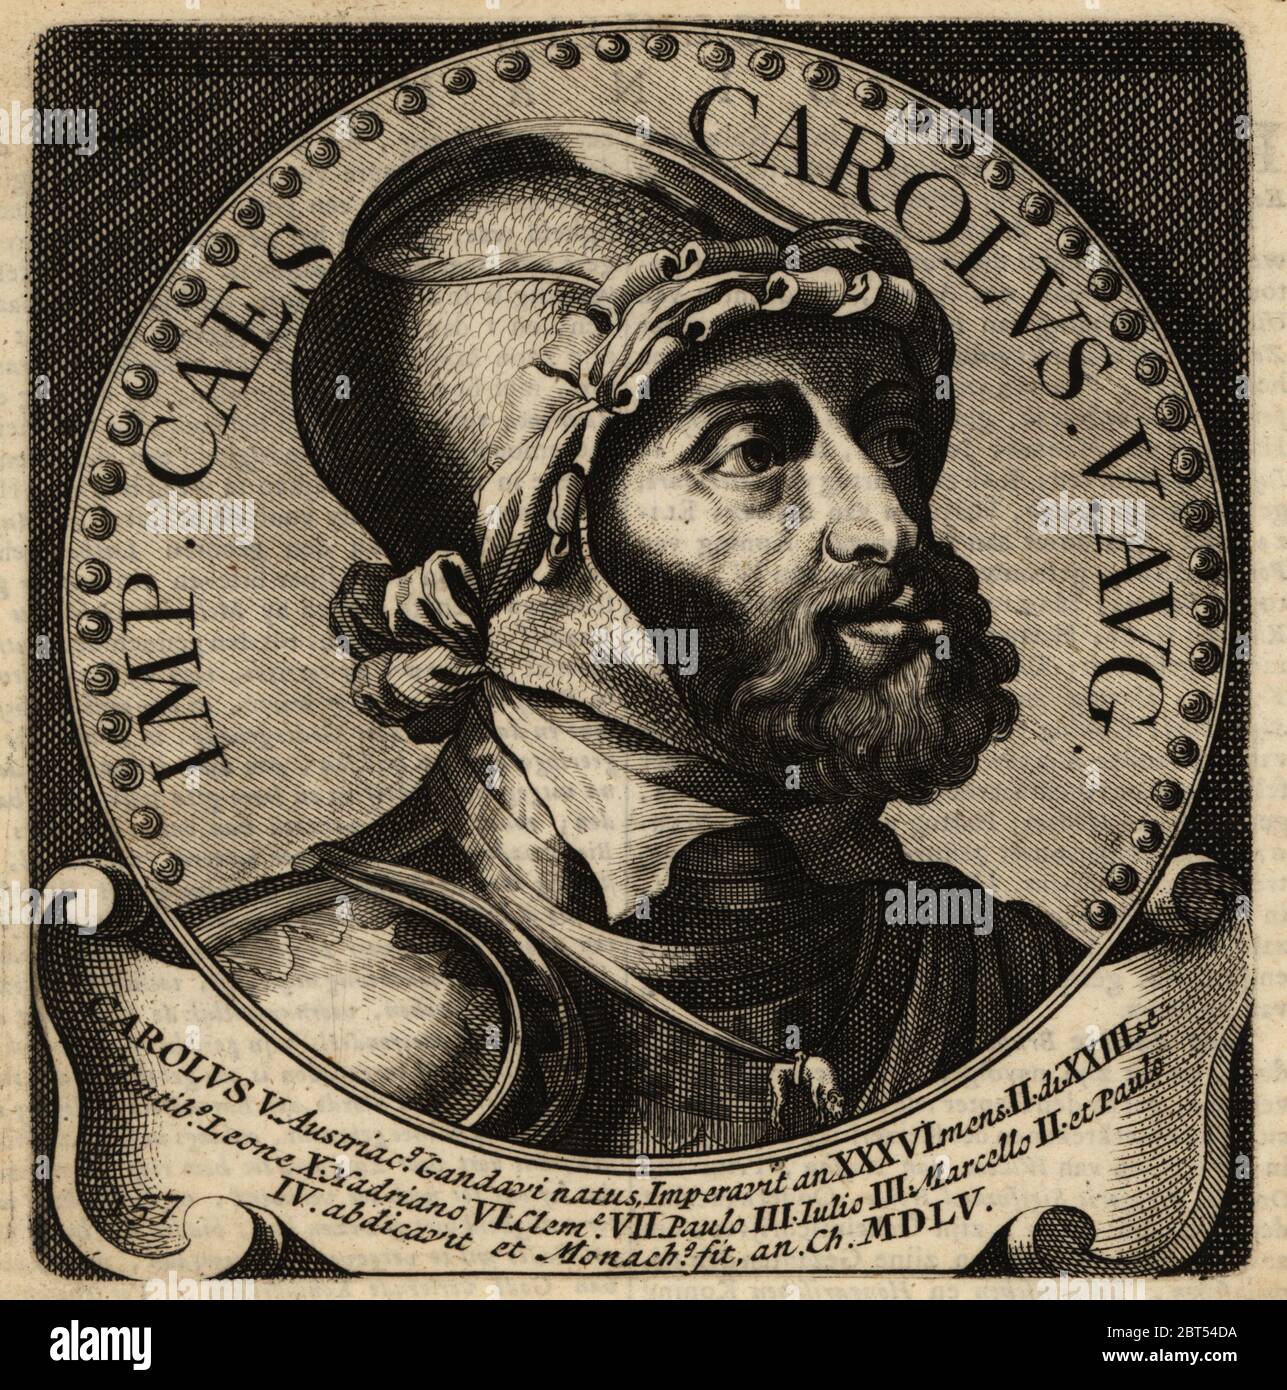 Holy Roman Emperor Charles V, 1500-1558. Carolus V Austriacus, King of Spain, Aragon, ruling prince of the Habsburg Netherlands. Copperplate engraving from Abraham Bogaerts De Roomsche Monarchy, The Roman Monarchy, Francois Salma, Utrecht, 1697. Stock Photo